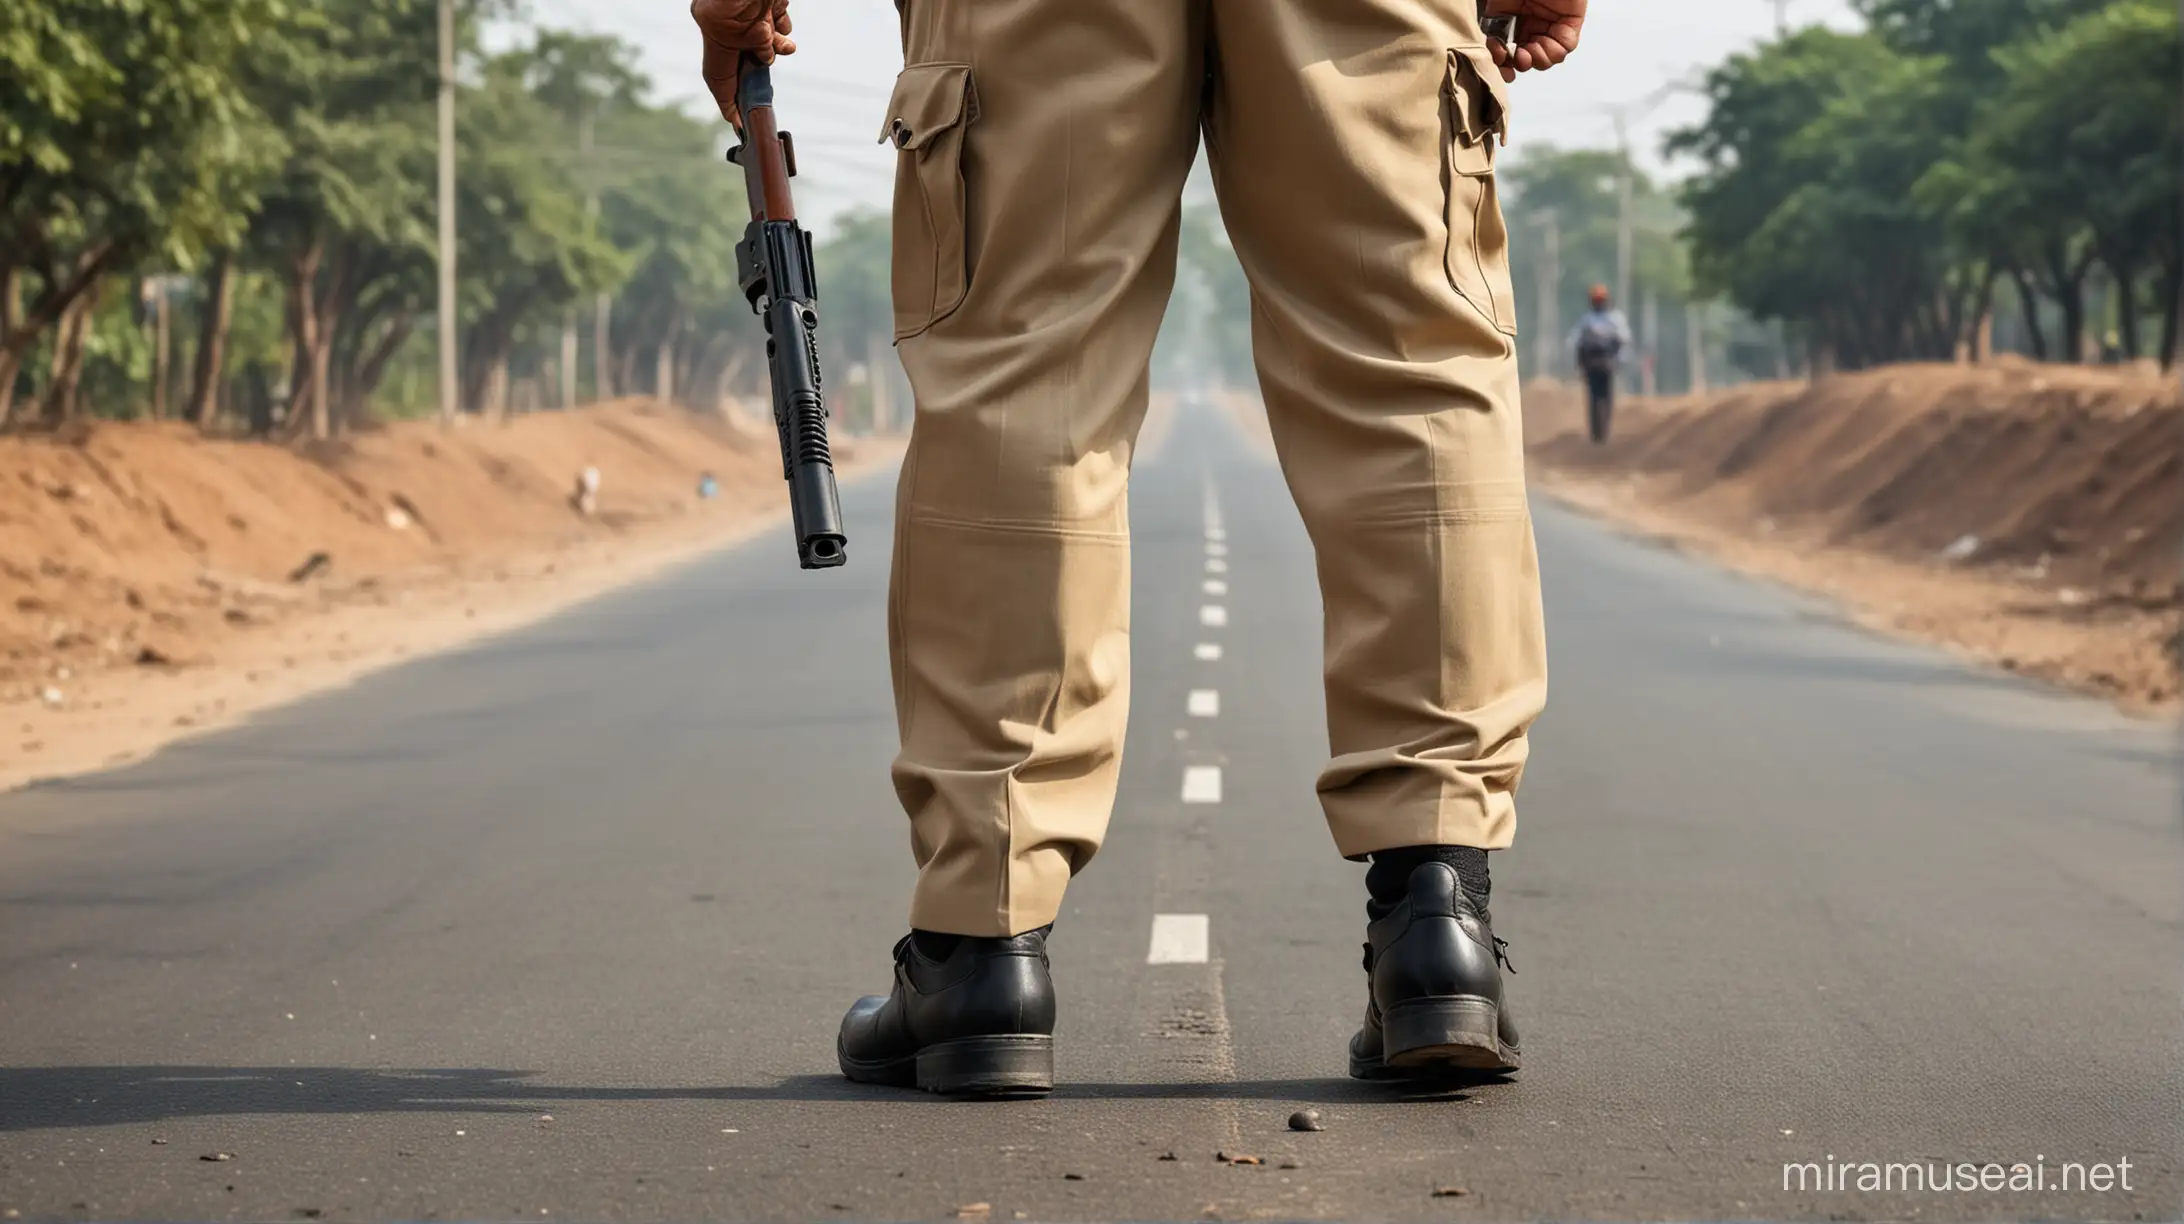 Indian Police Officer Patrolling Street with Gun